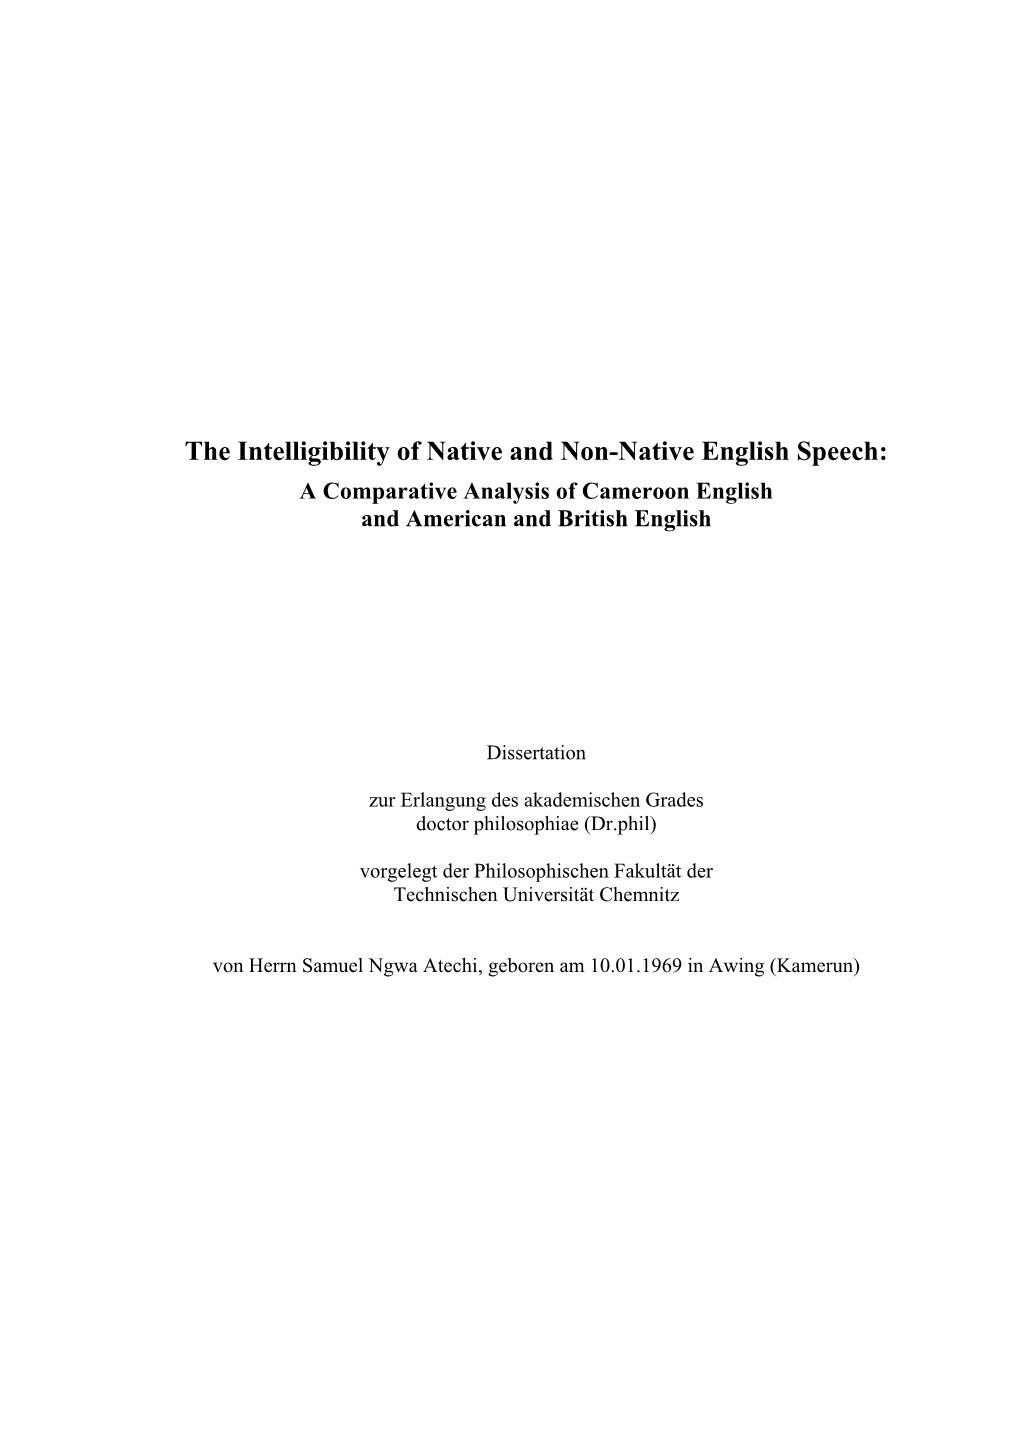 The Intelligibility of Native and Non-Native English Speech: a Comparative Analysis of Cameroon English and American and British English